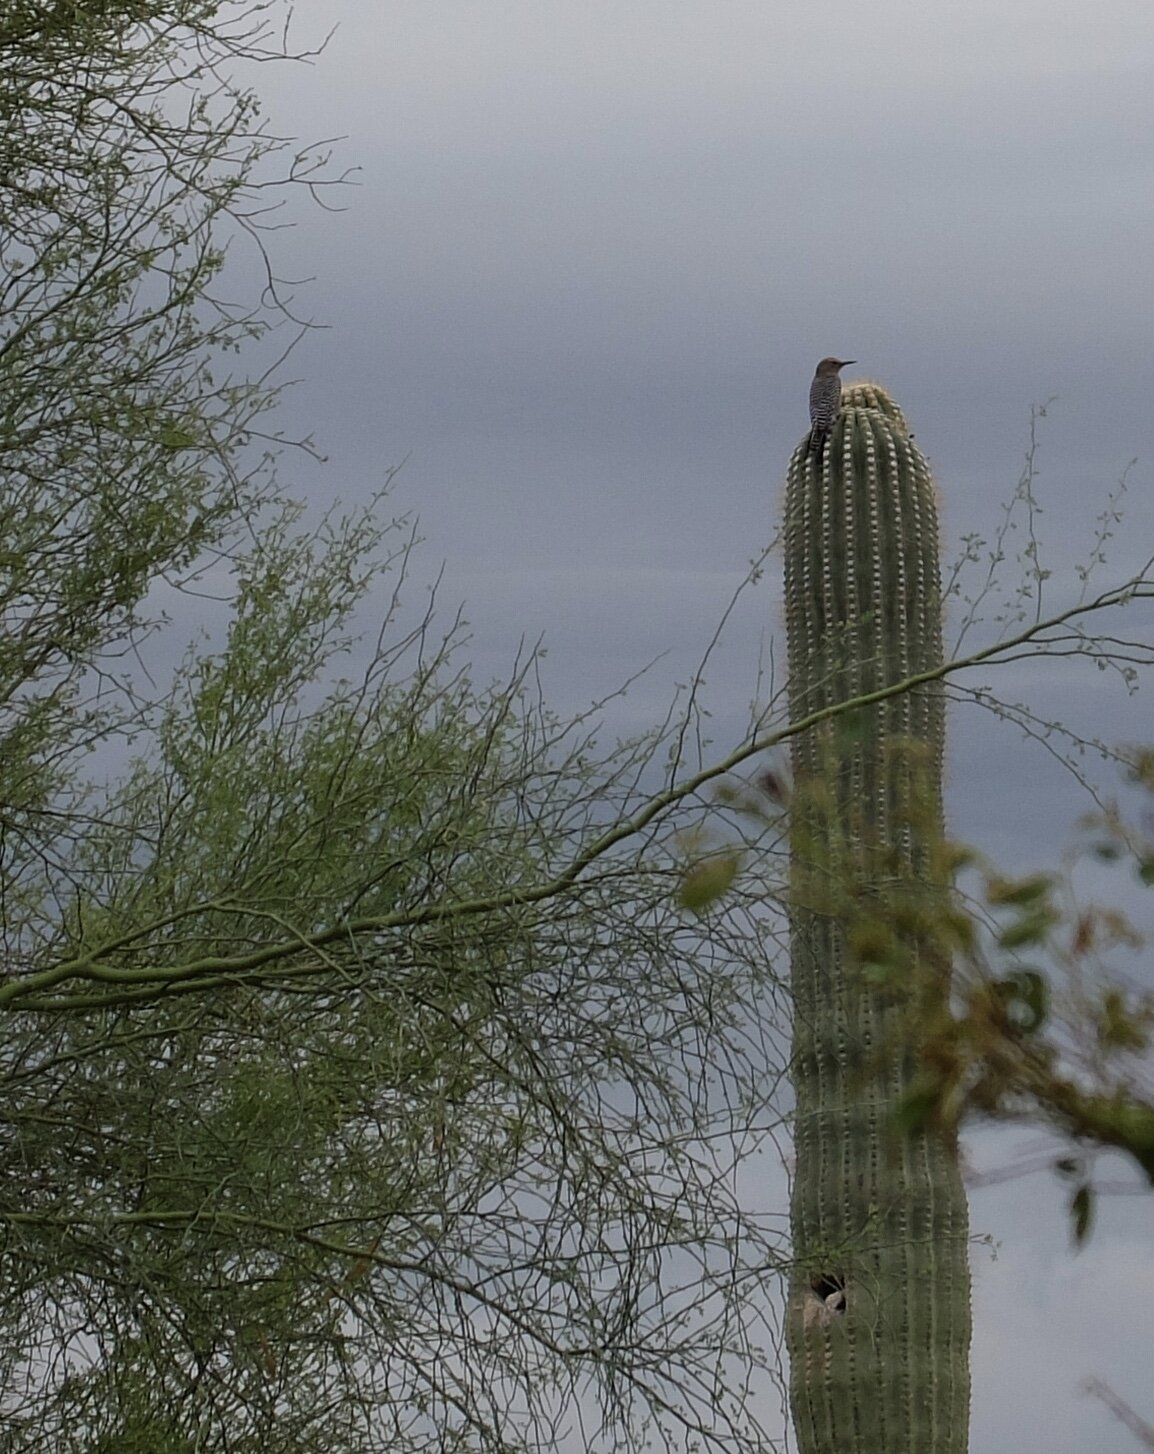 Woodpecker atop a saguaro.  Follow it down to see the hole where woody lives.